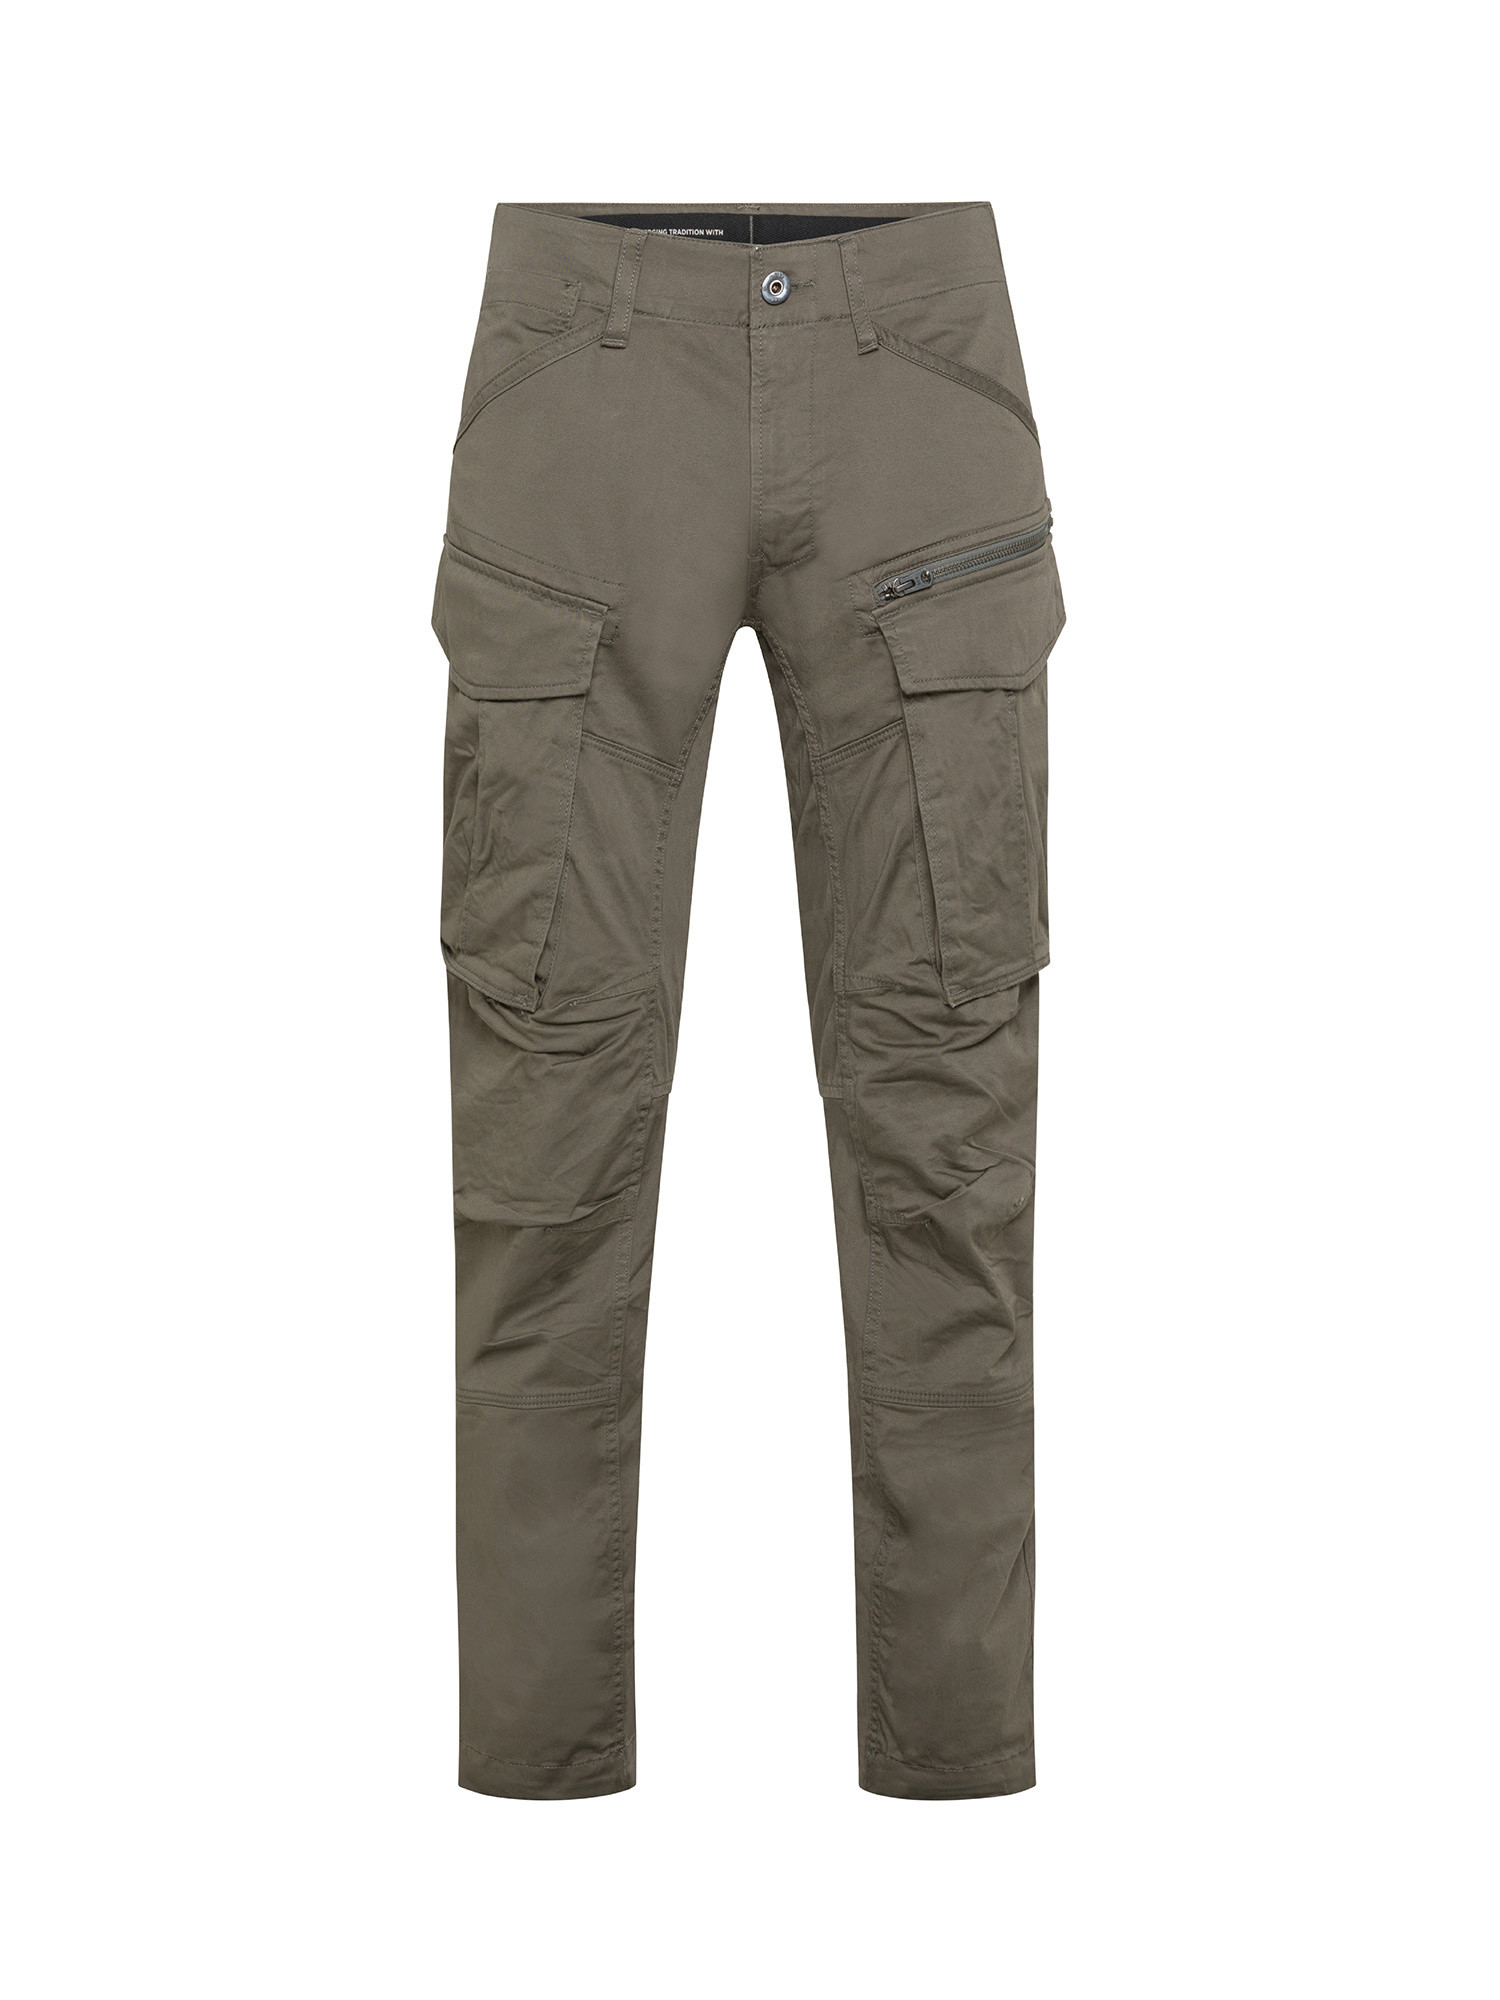 G-Star Cargo Pants, Anthracite, large image number 0